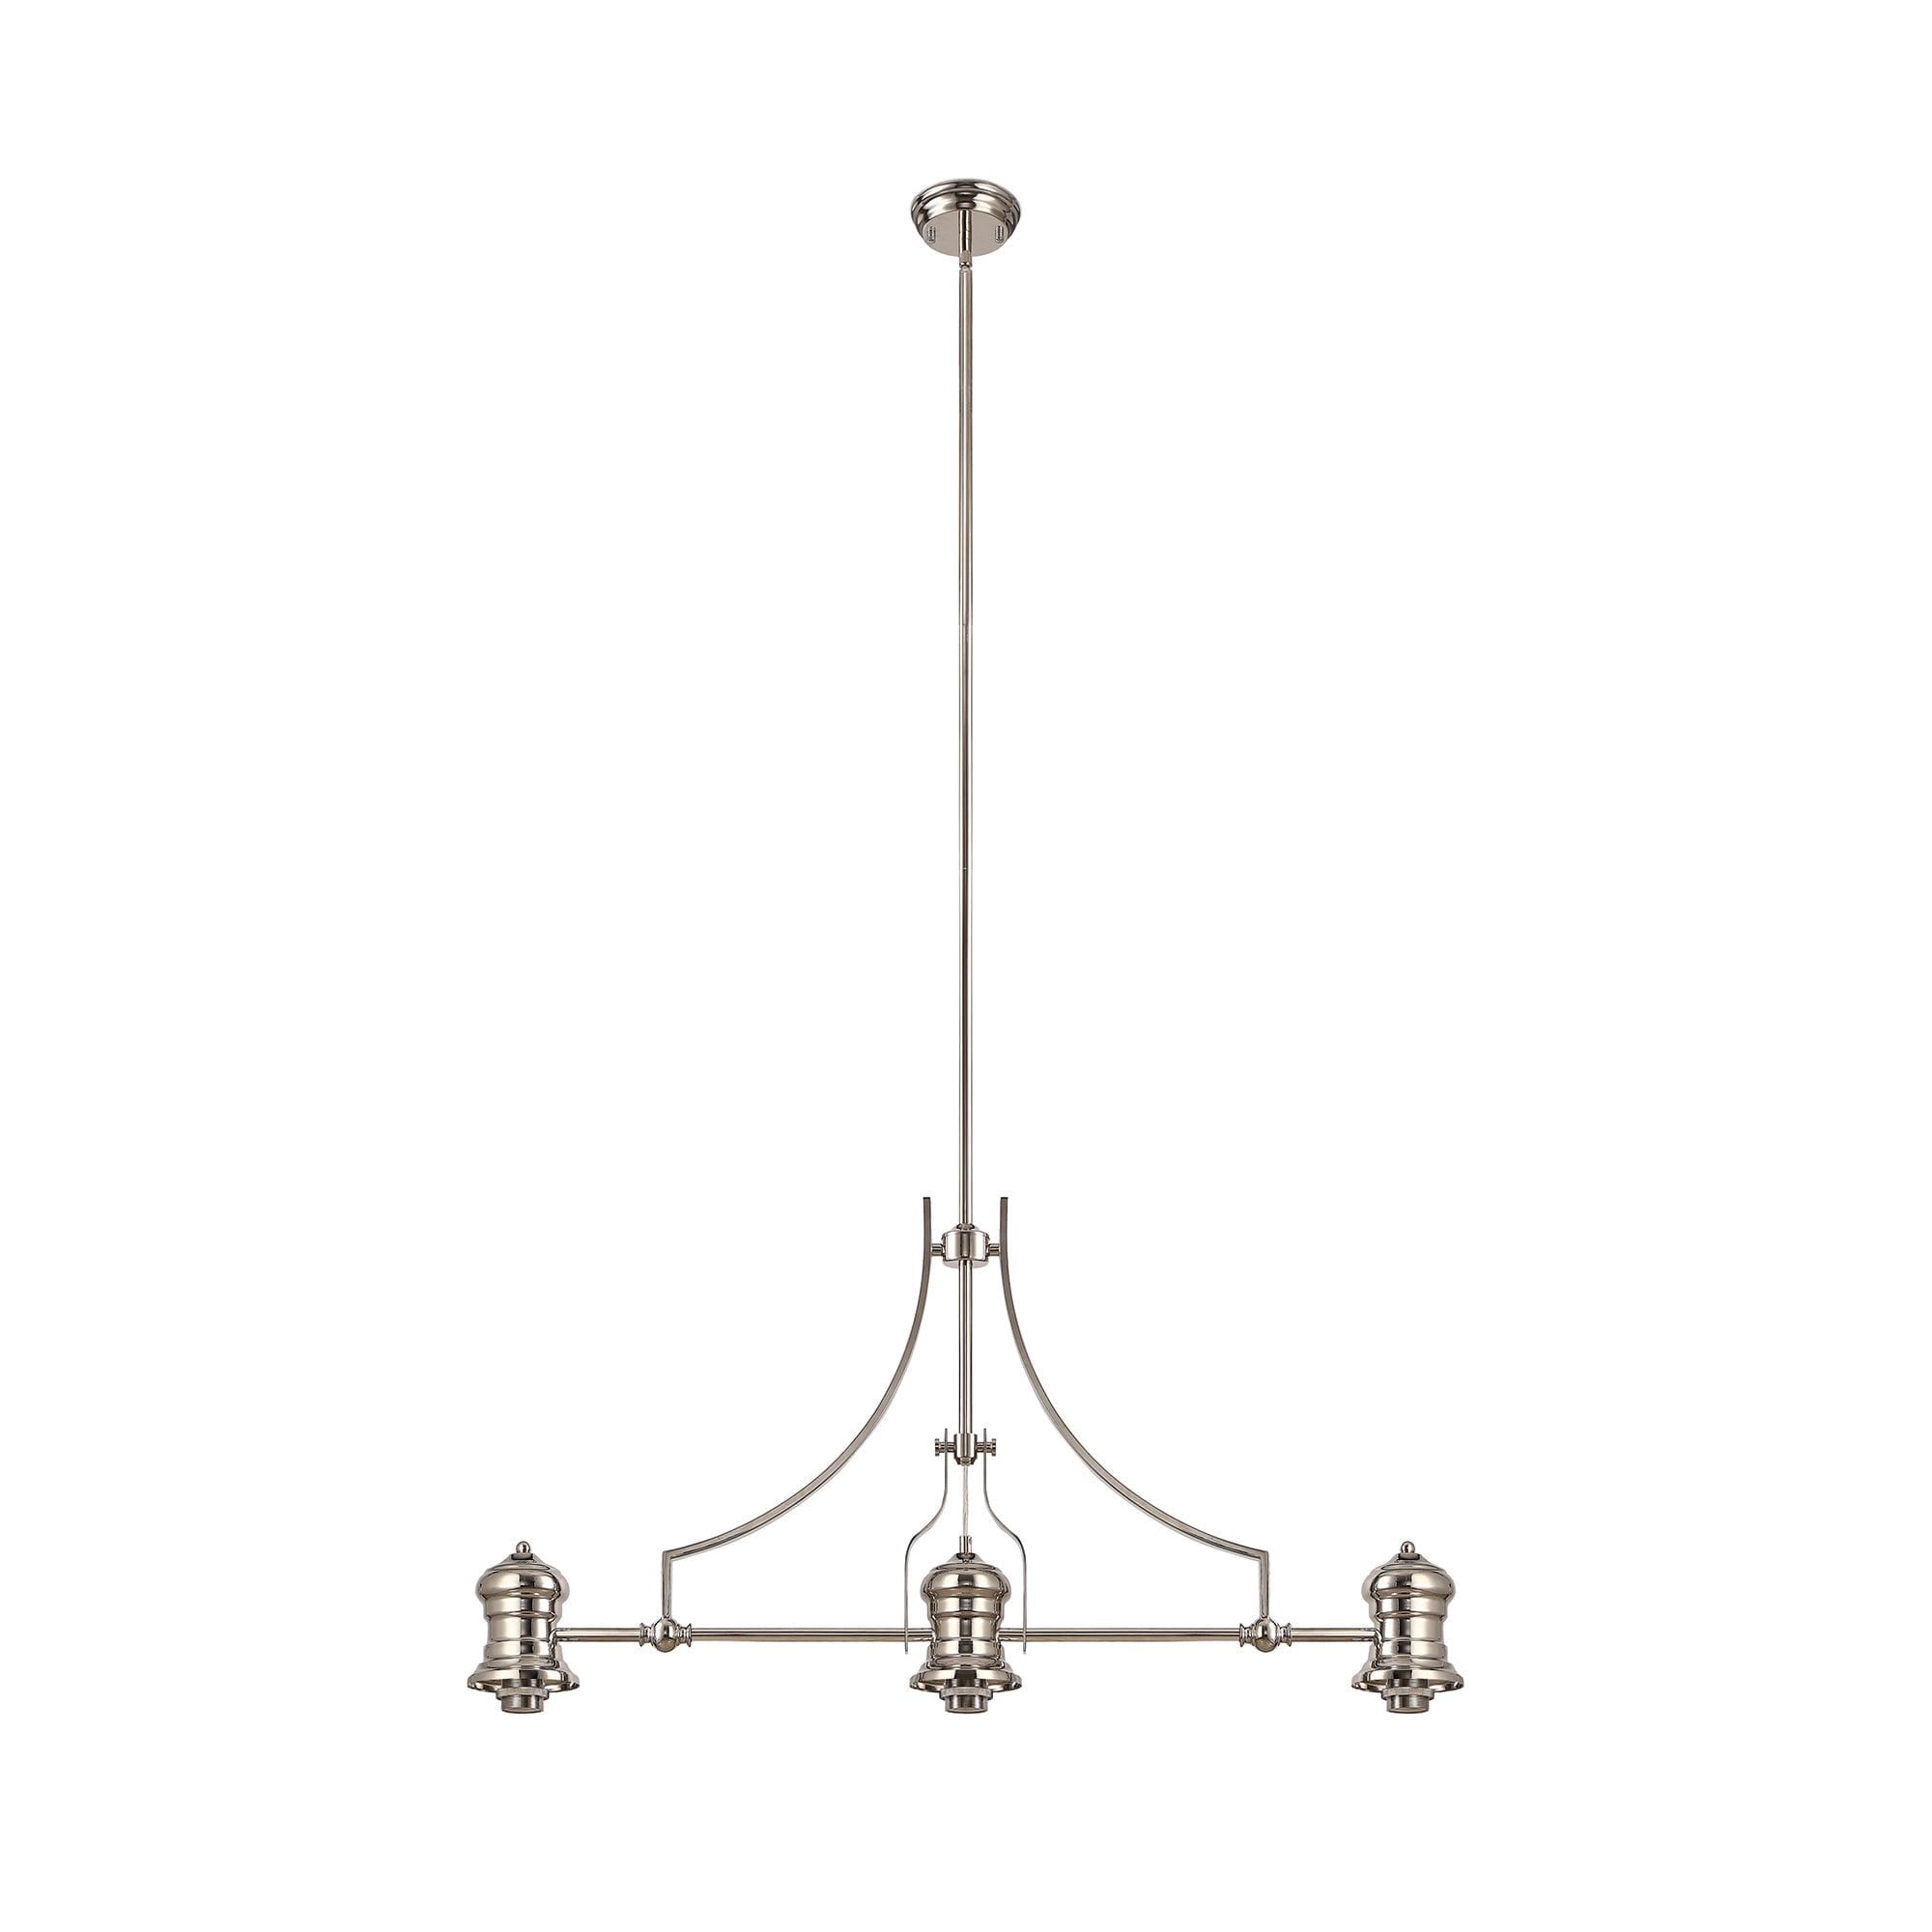 3 Light Telescopic Pendant E27 With 33.5cm Prismatic Glass Shade, Polished Nickel/Clear